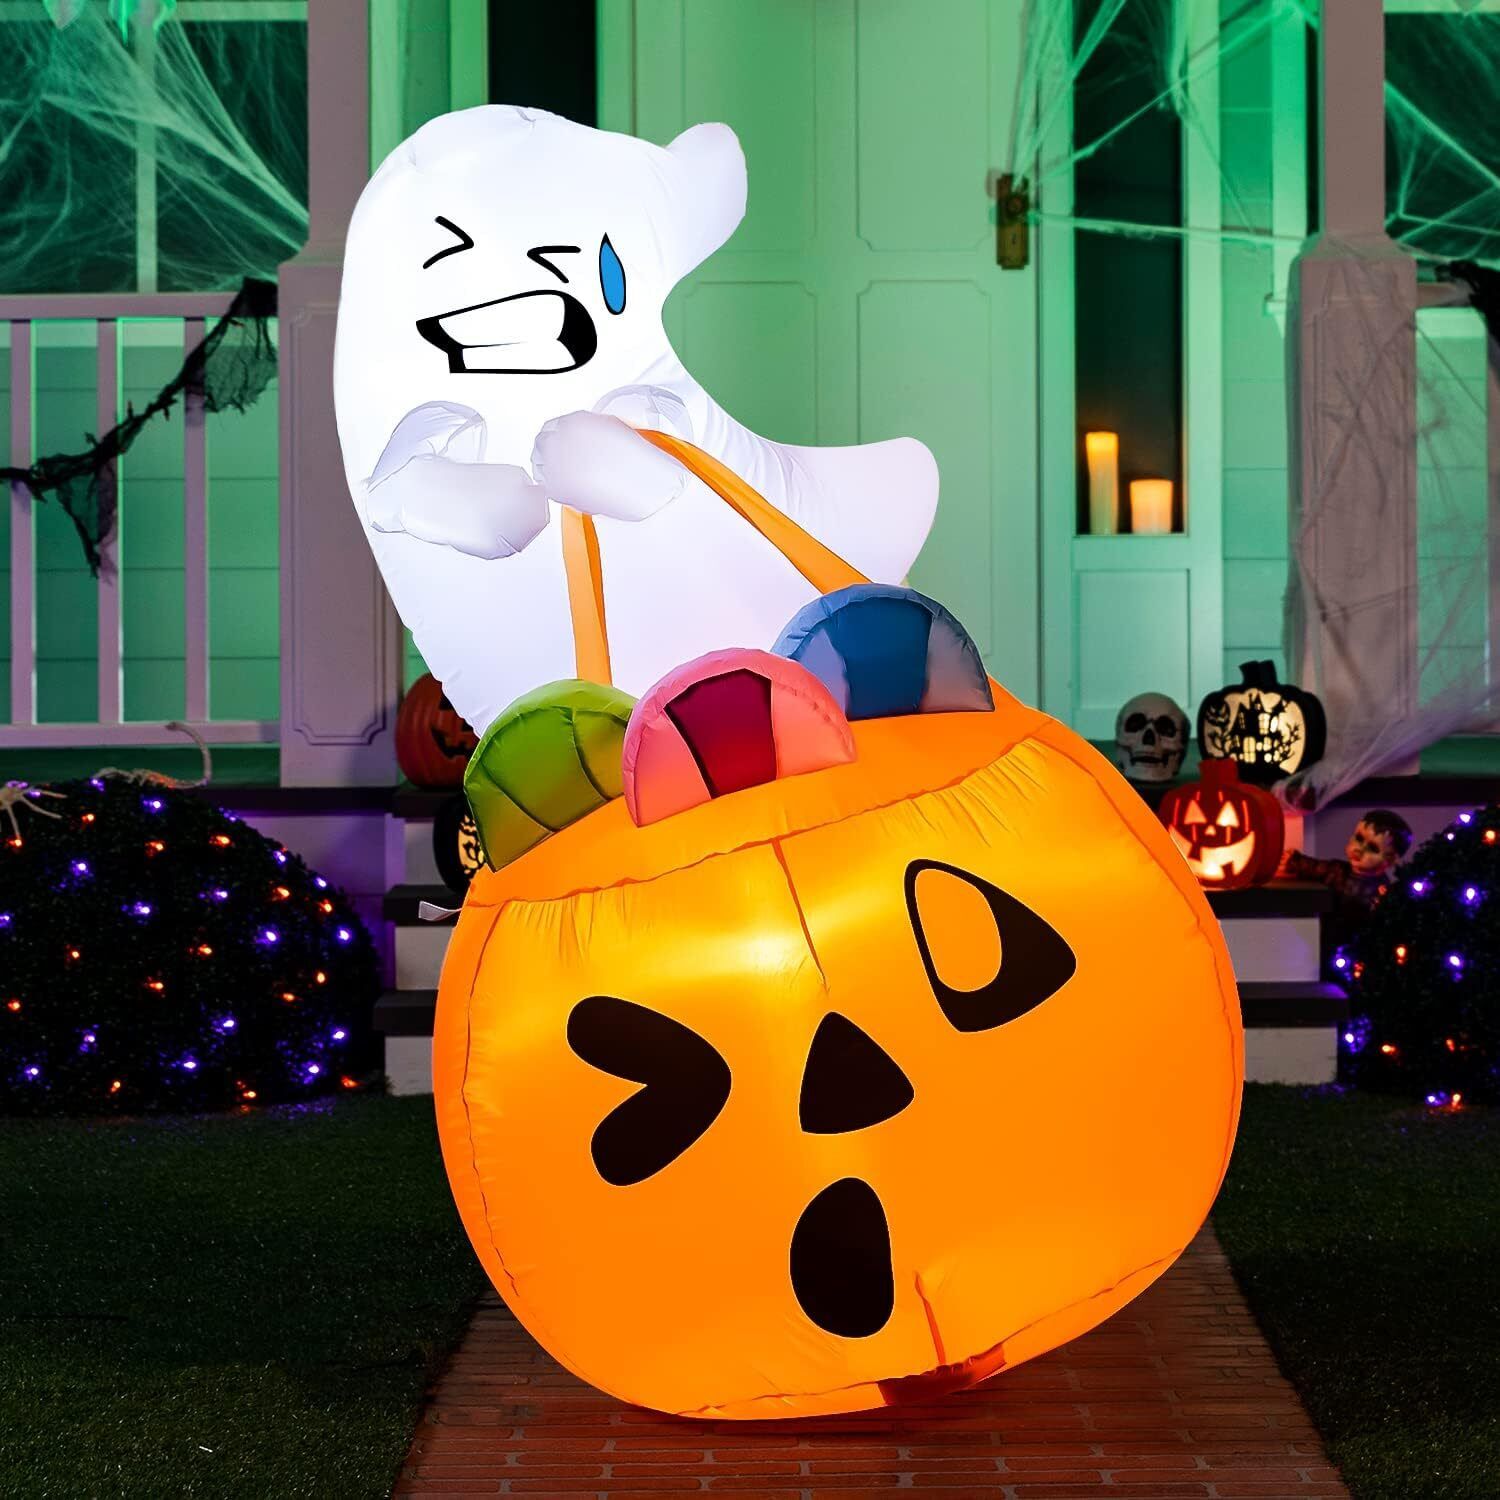 Joiedomi 5 FT Tall Halloween Inflatable Cute Ghost Inflatable Lift Pumpkin Candy